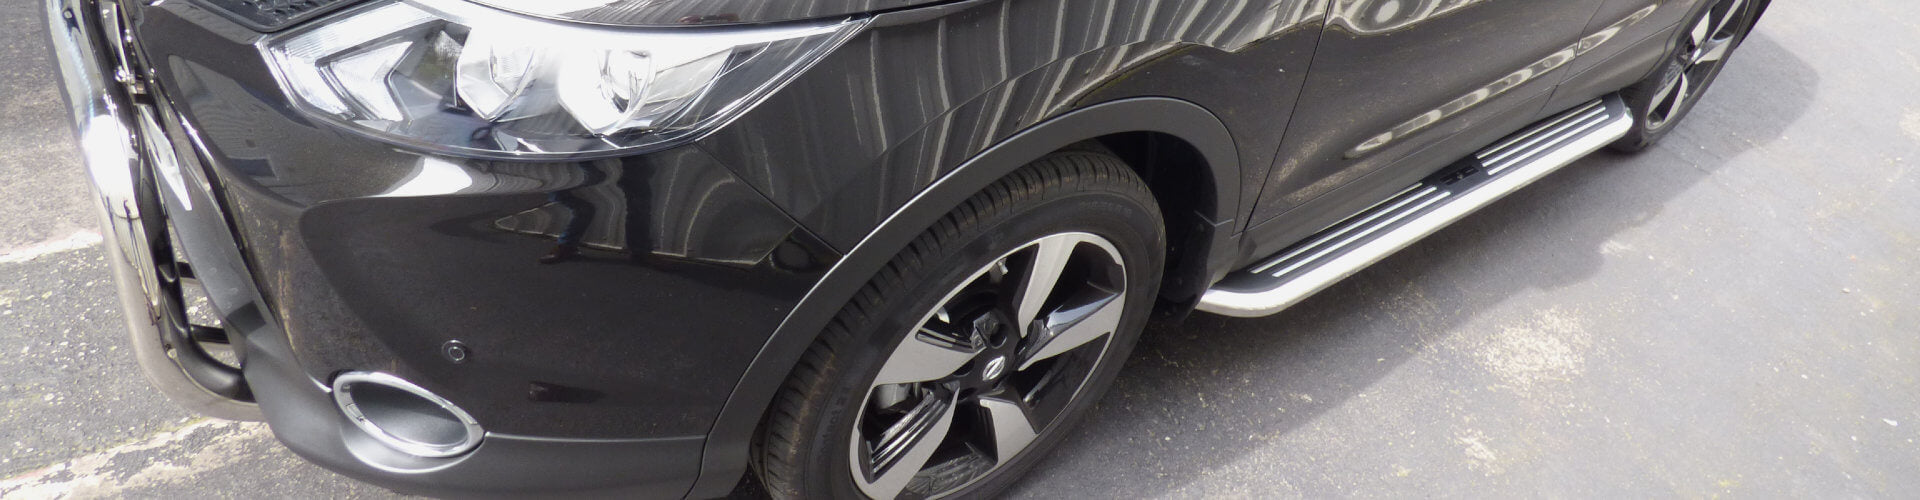 Direct4x4 Accessories UK | Nissan Side Steps, Side Bars & Running Boards